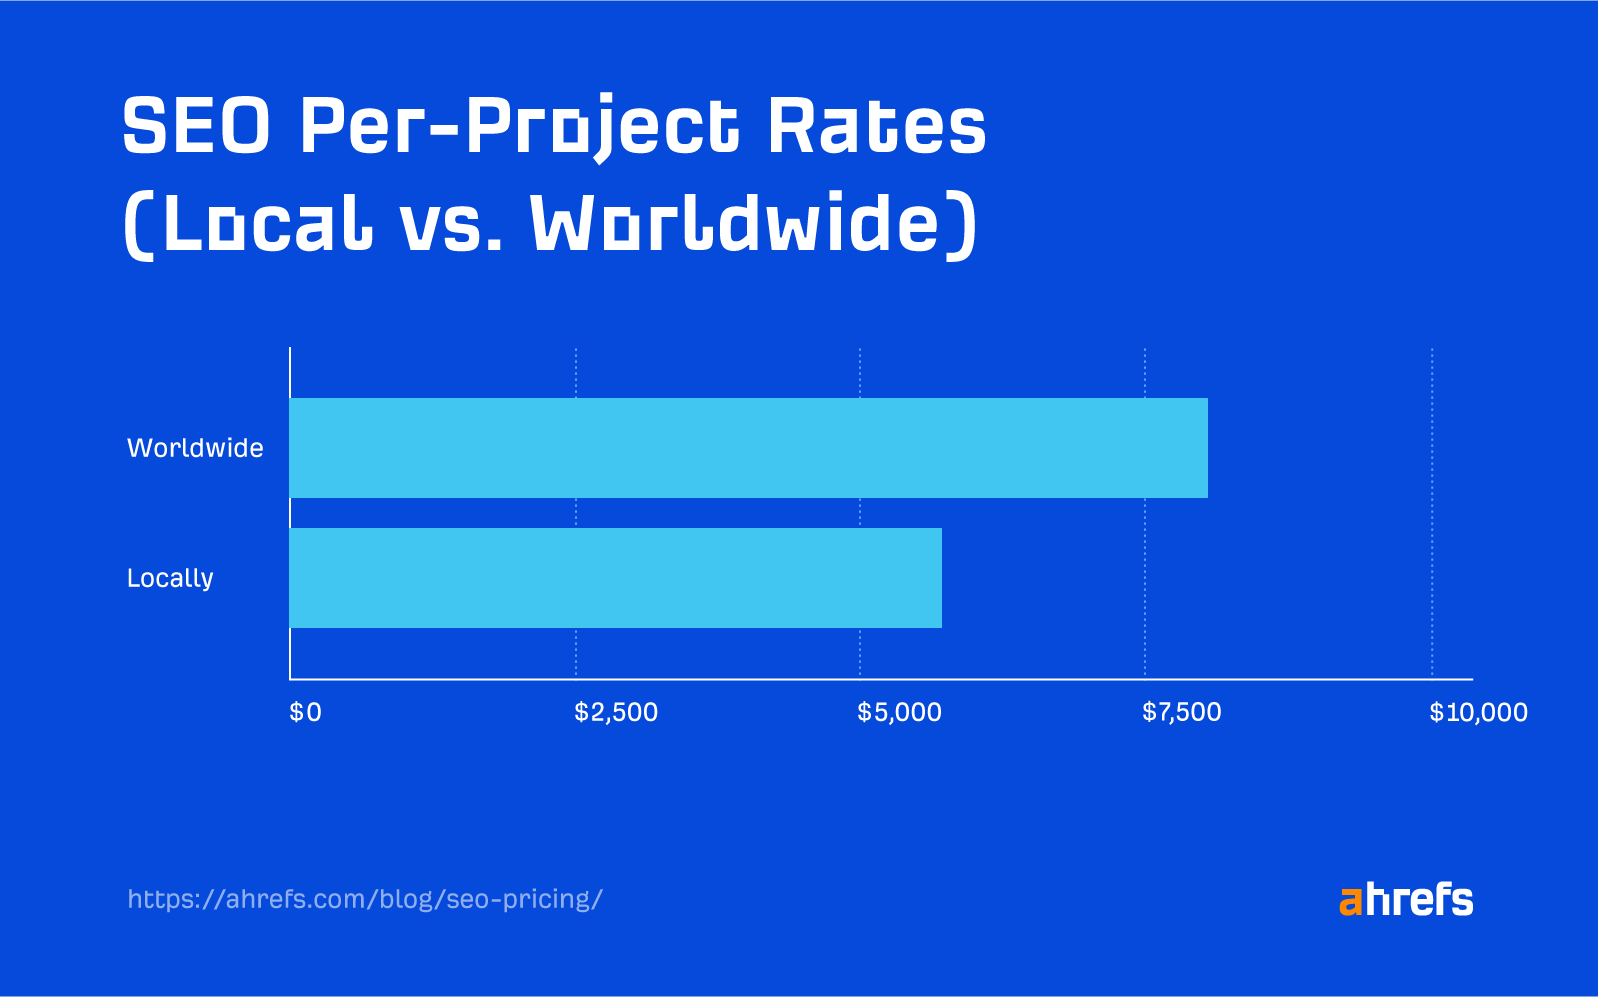 Survey Results: SEO Rates Per Project (Local vs. Worldwide)